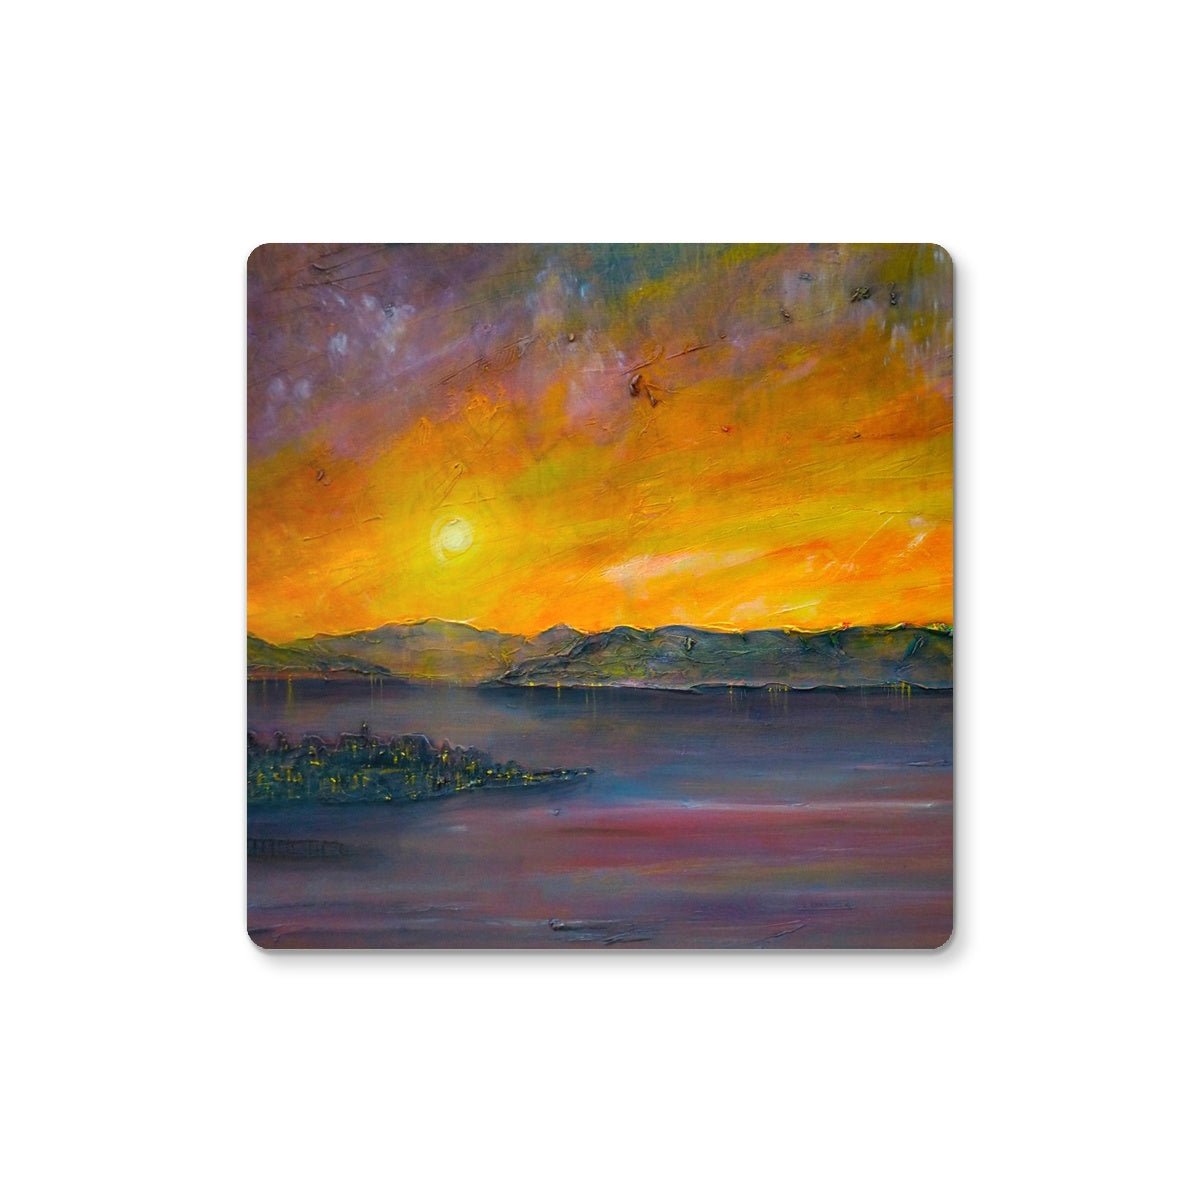 Sunset Over Gourock Art Gifts Coaster-Coasters-River Clyde Art Gallery-4 Coasters-Paintings, Prints, Homeware, Art Gifts From Scotland By Scottish Artist Kevin Hunter